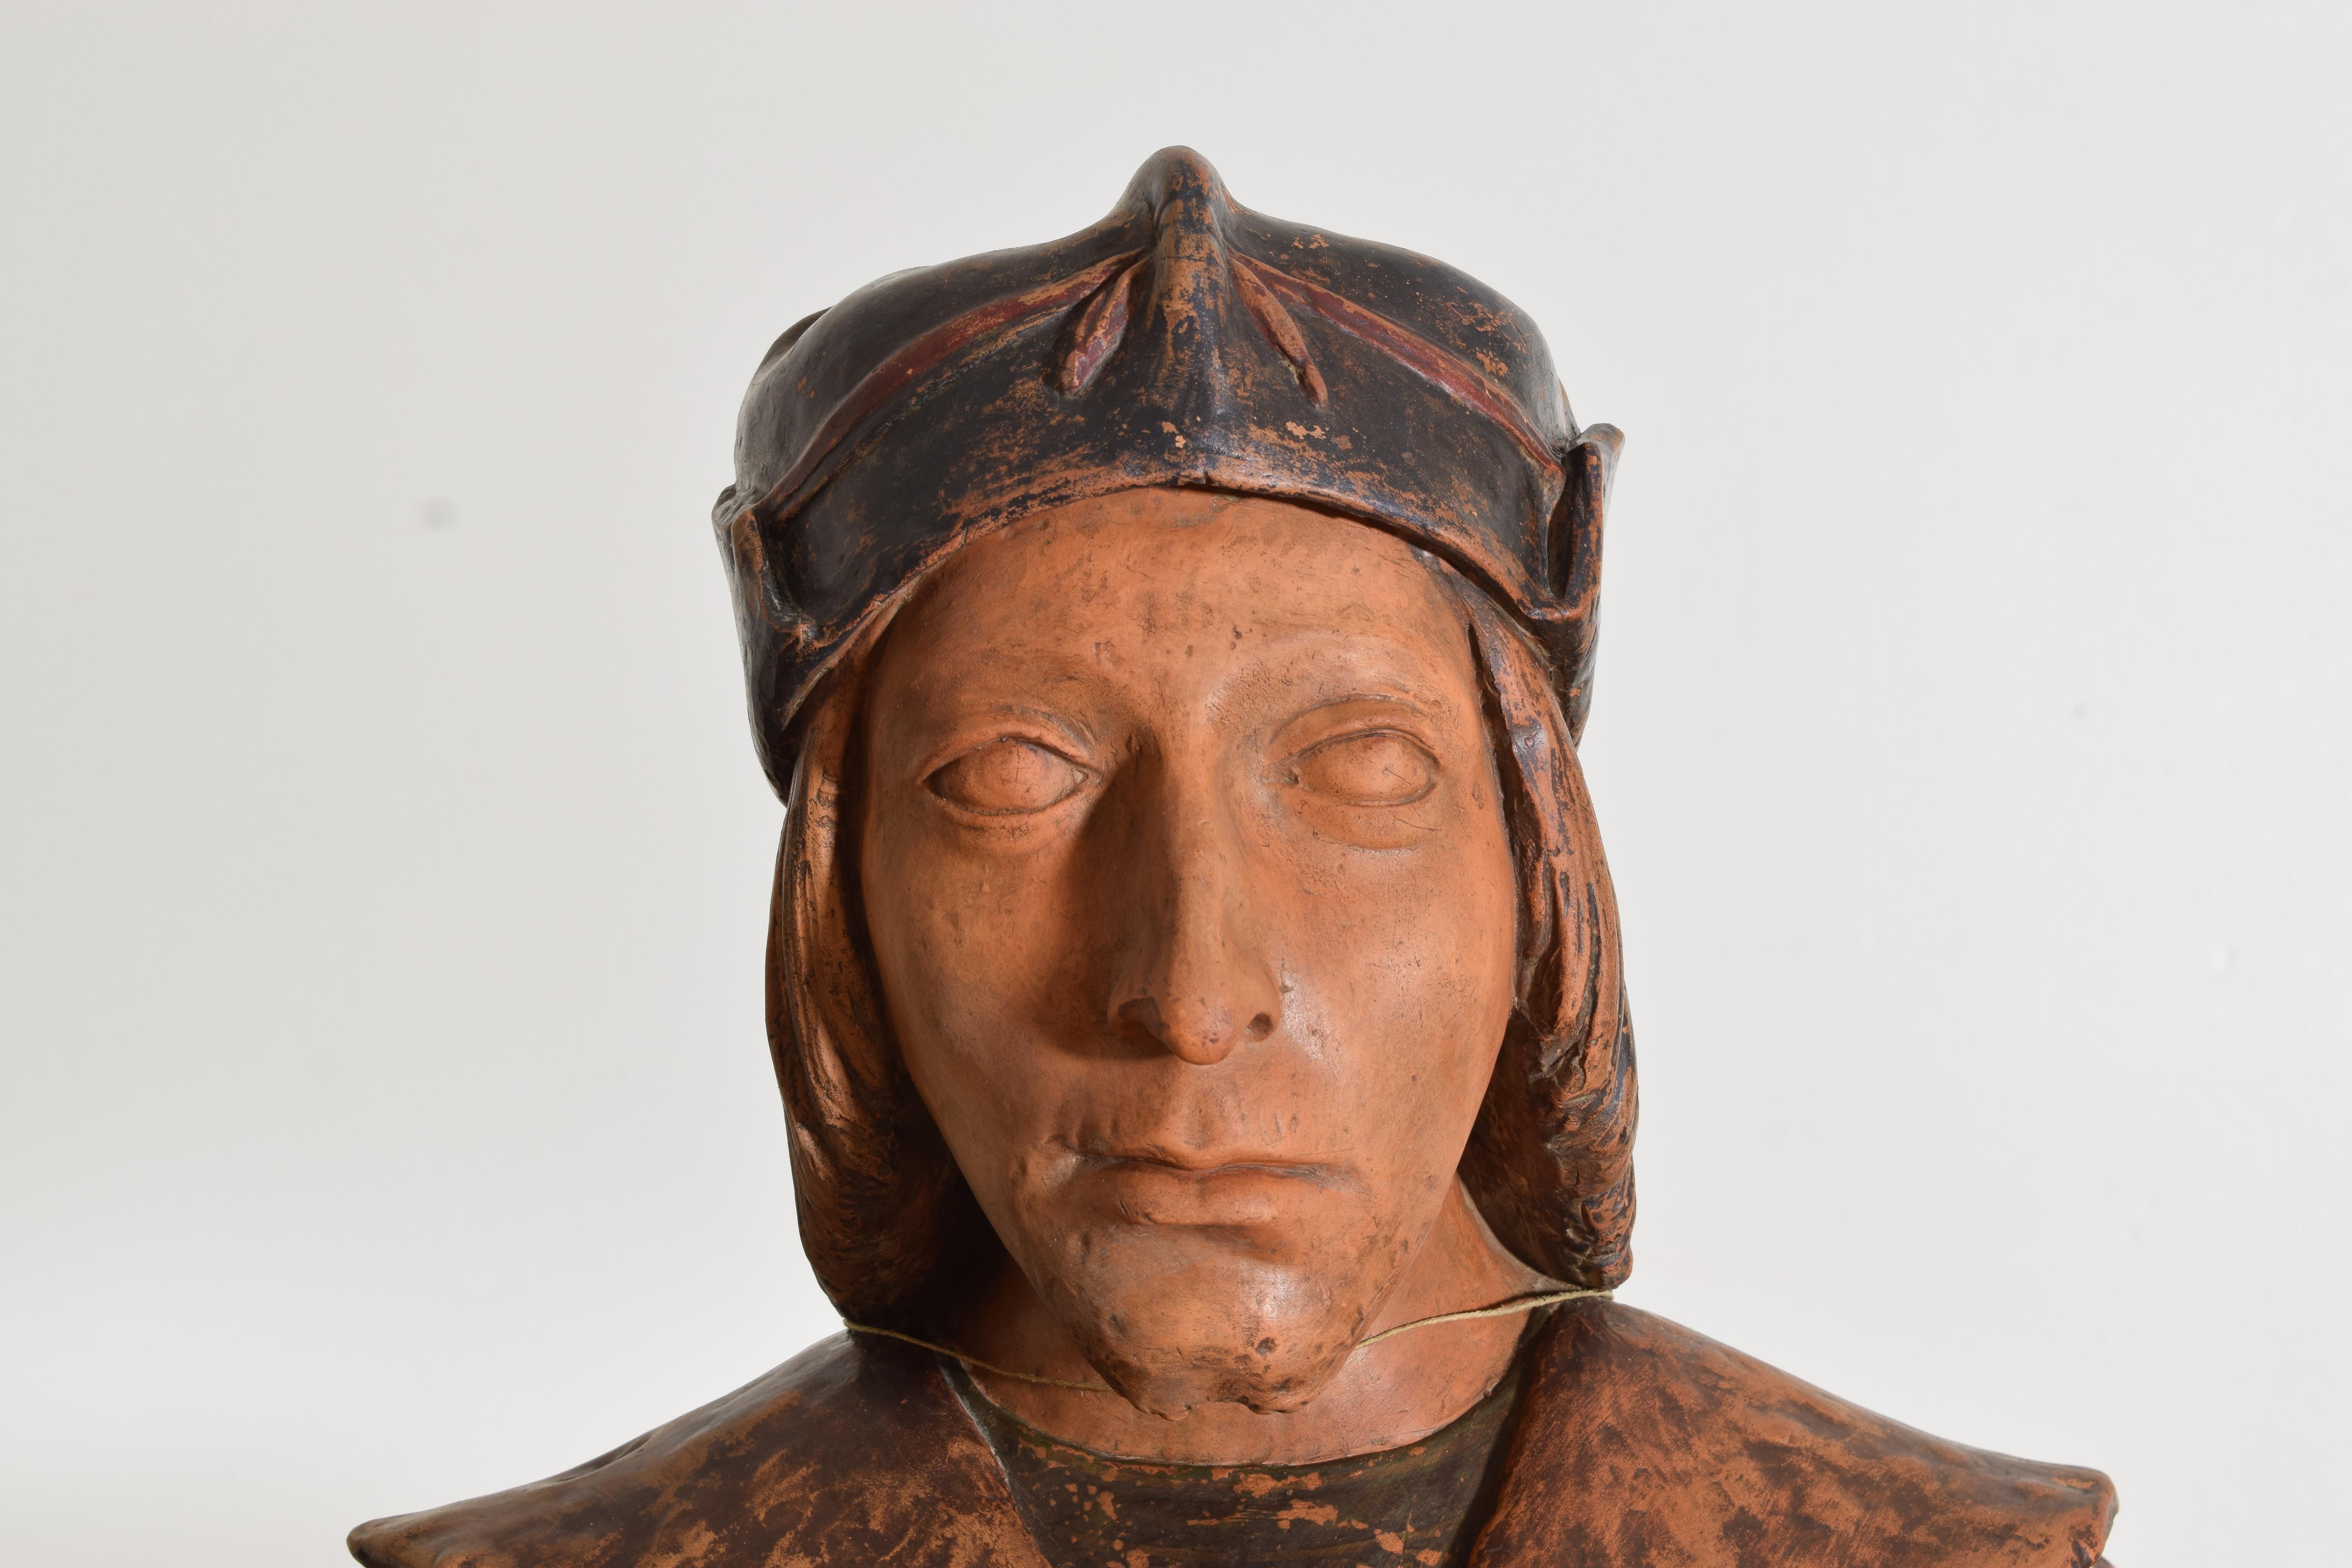 Terracotta Italian Terra Cotta Bust of Dante Alighieri on Wooden Stand, Early 20th Century For Sale